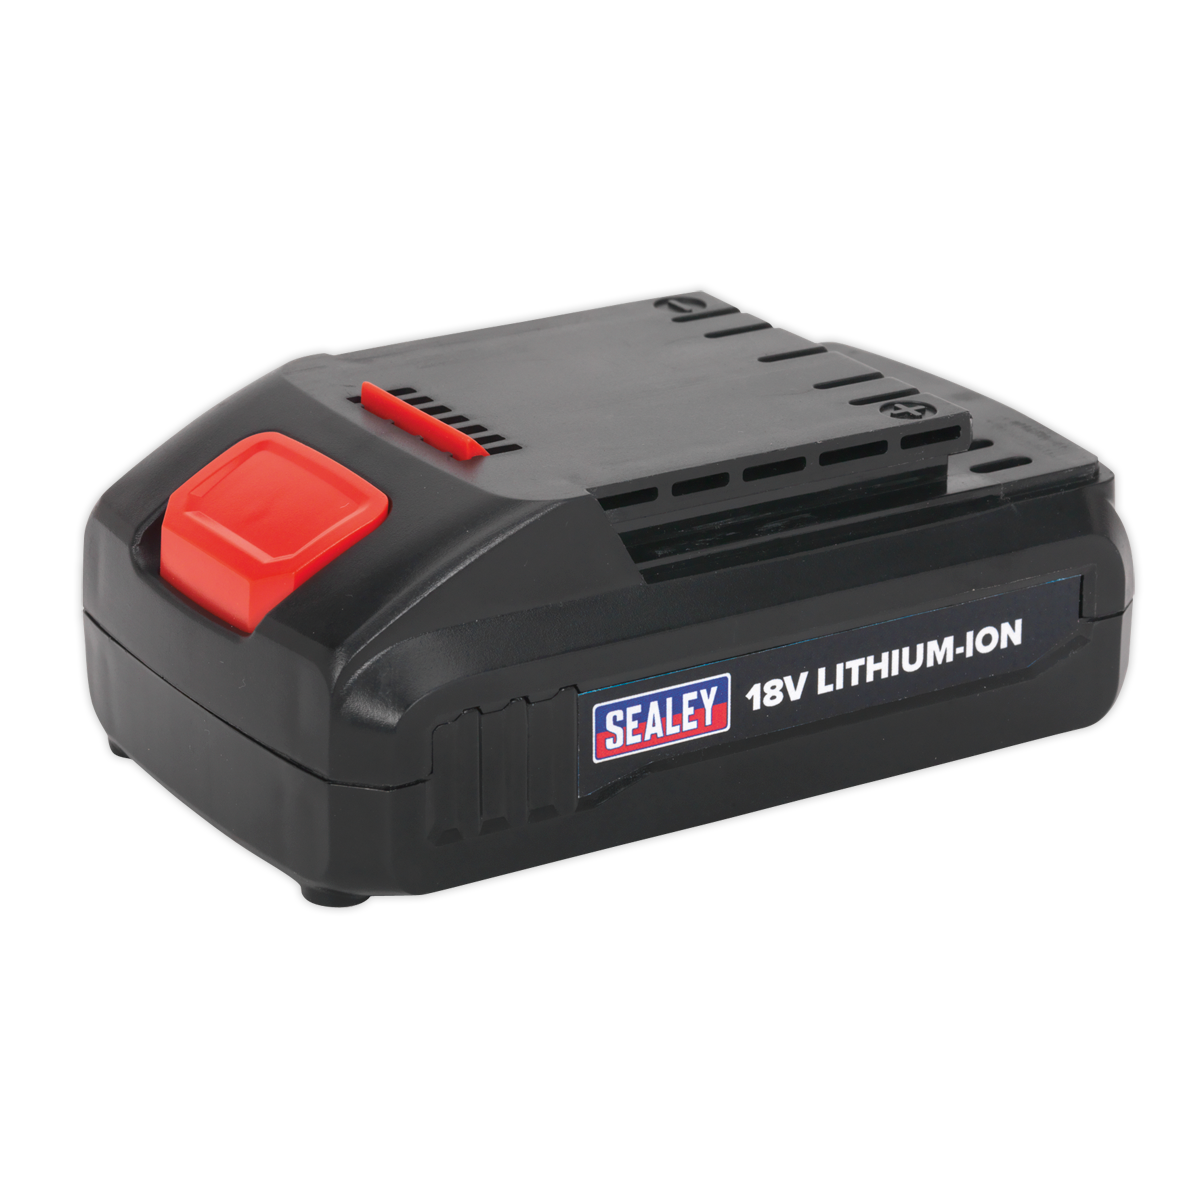 Sealey Power Tool Battery 18V 1.3Ah Lithium-ion for CP2518L